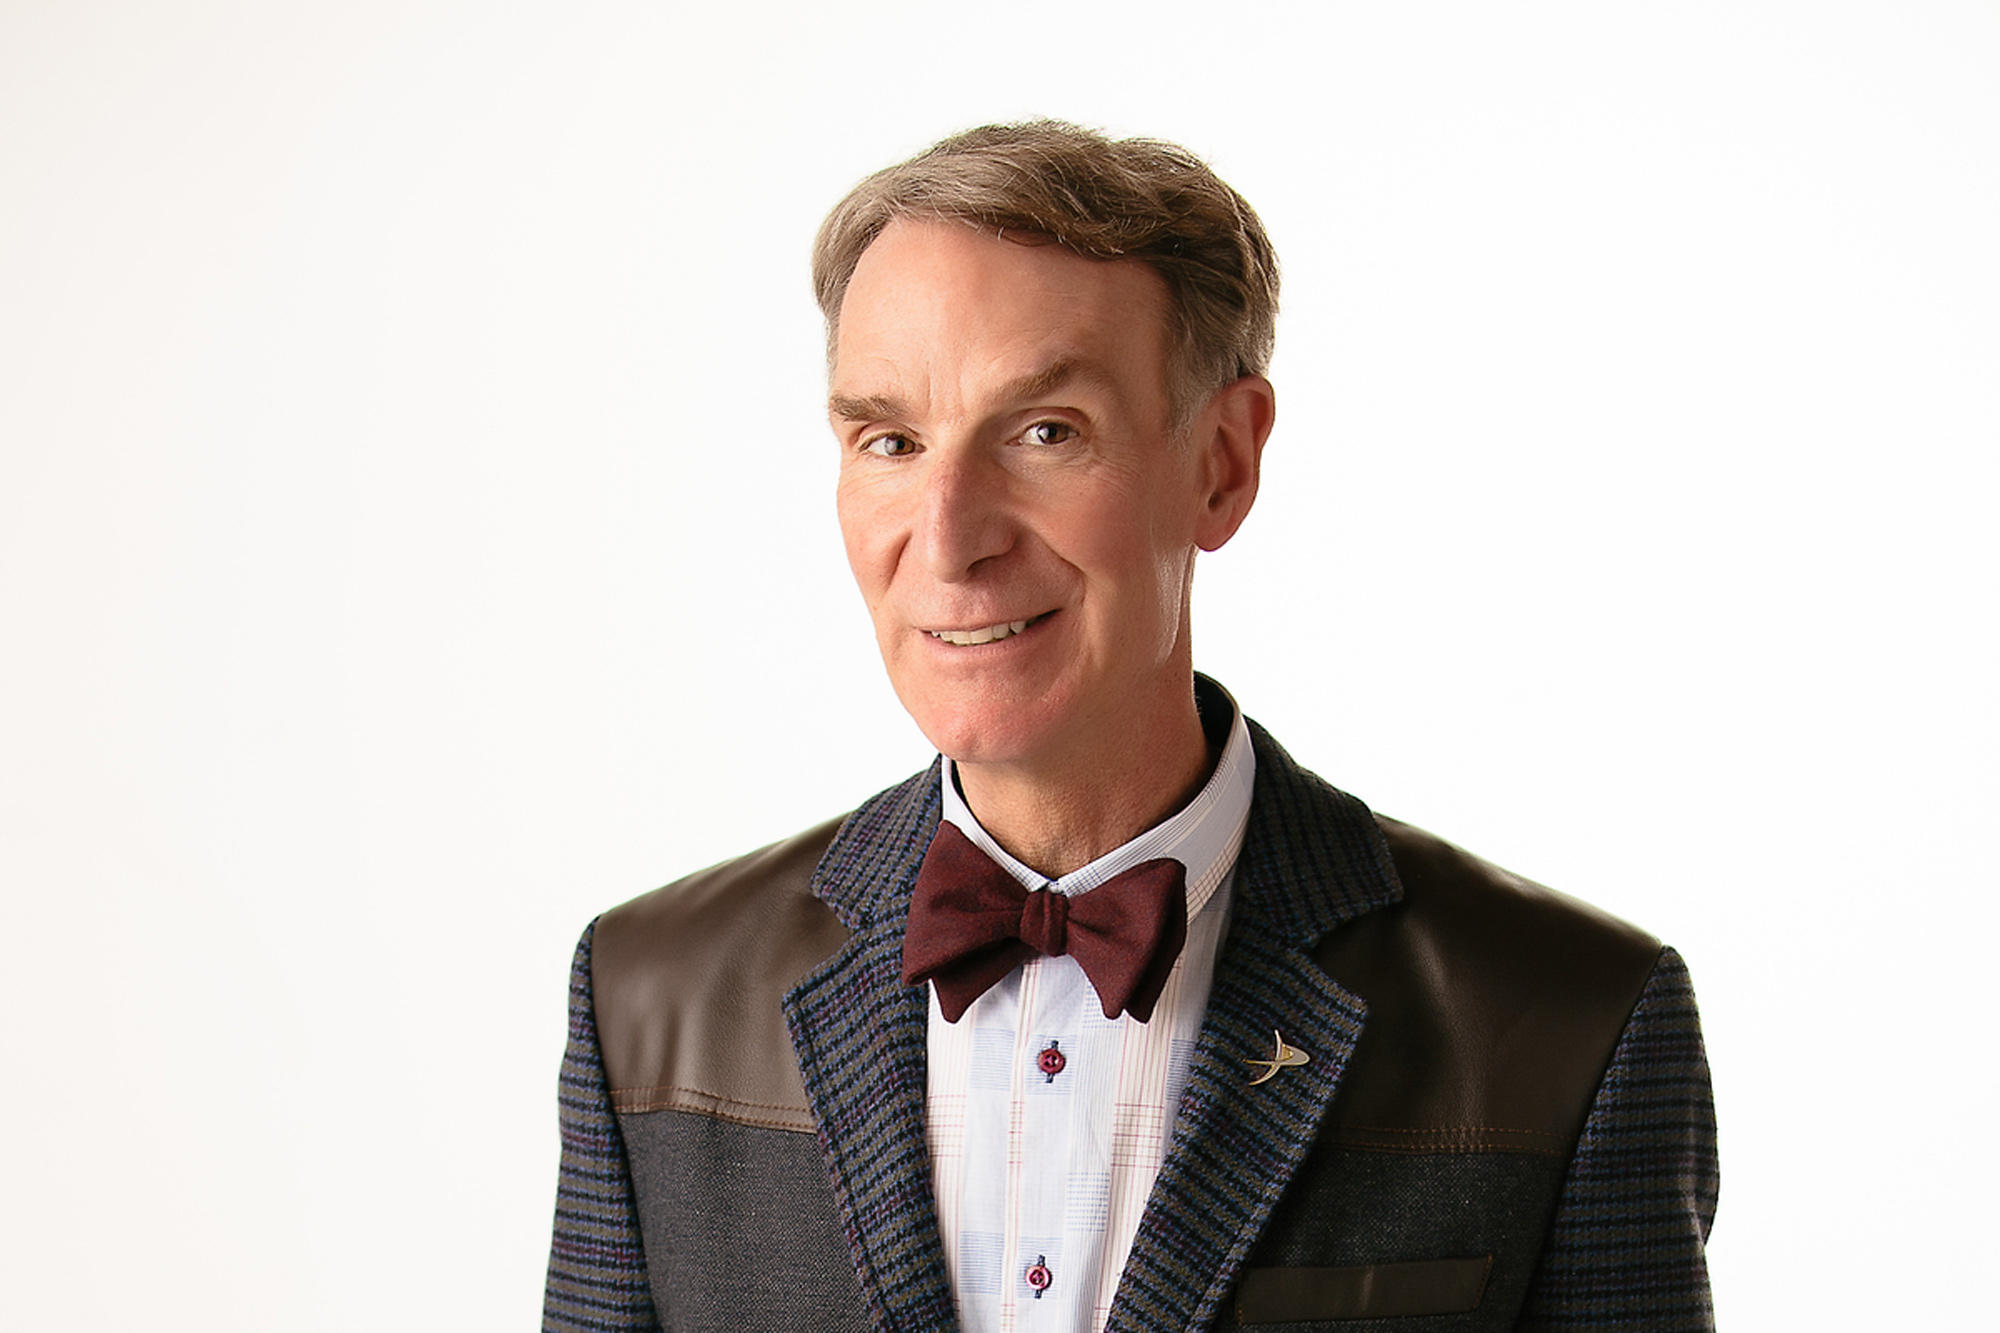 Bill Nye says trust in science is key to beating COVID-19 and climate change